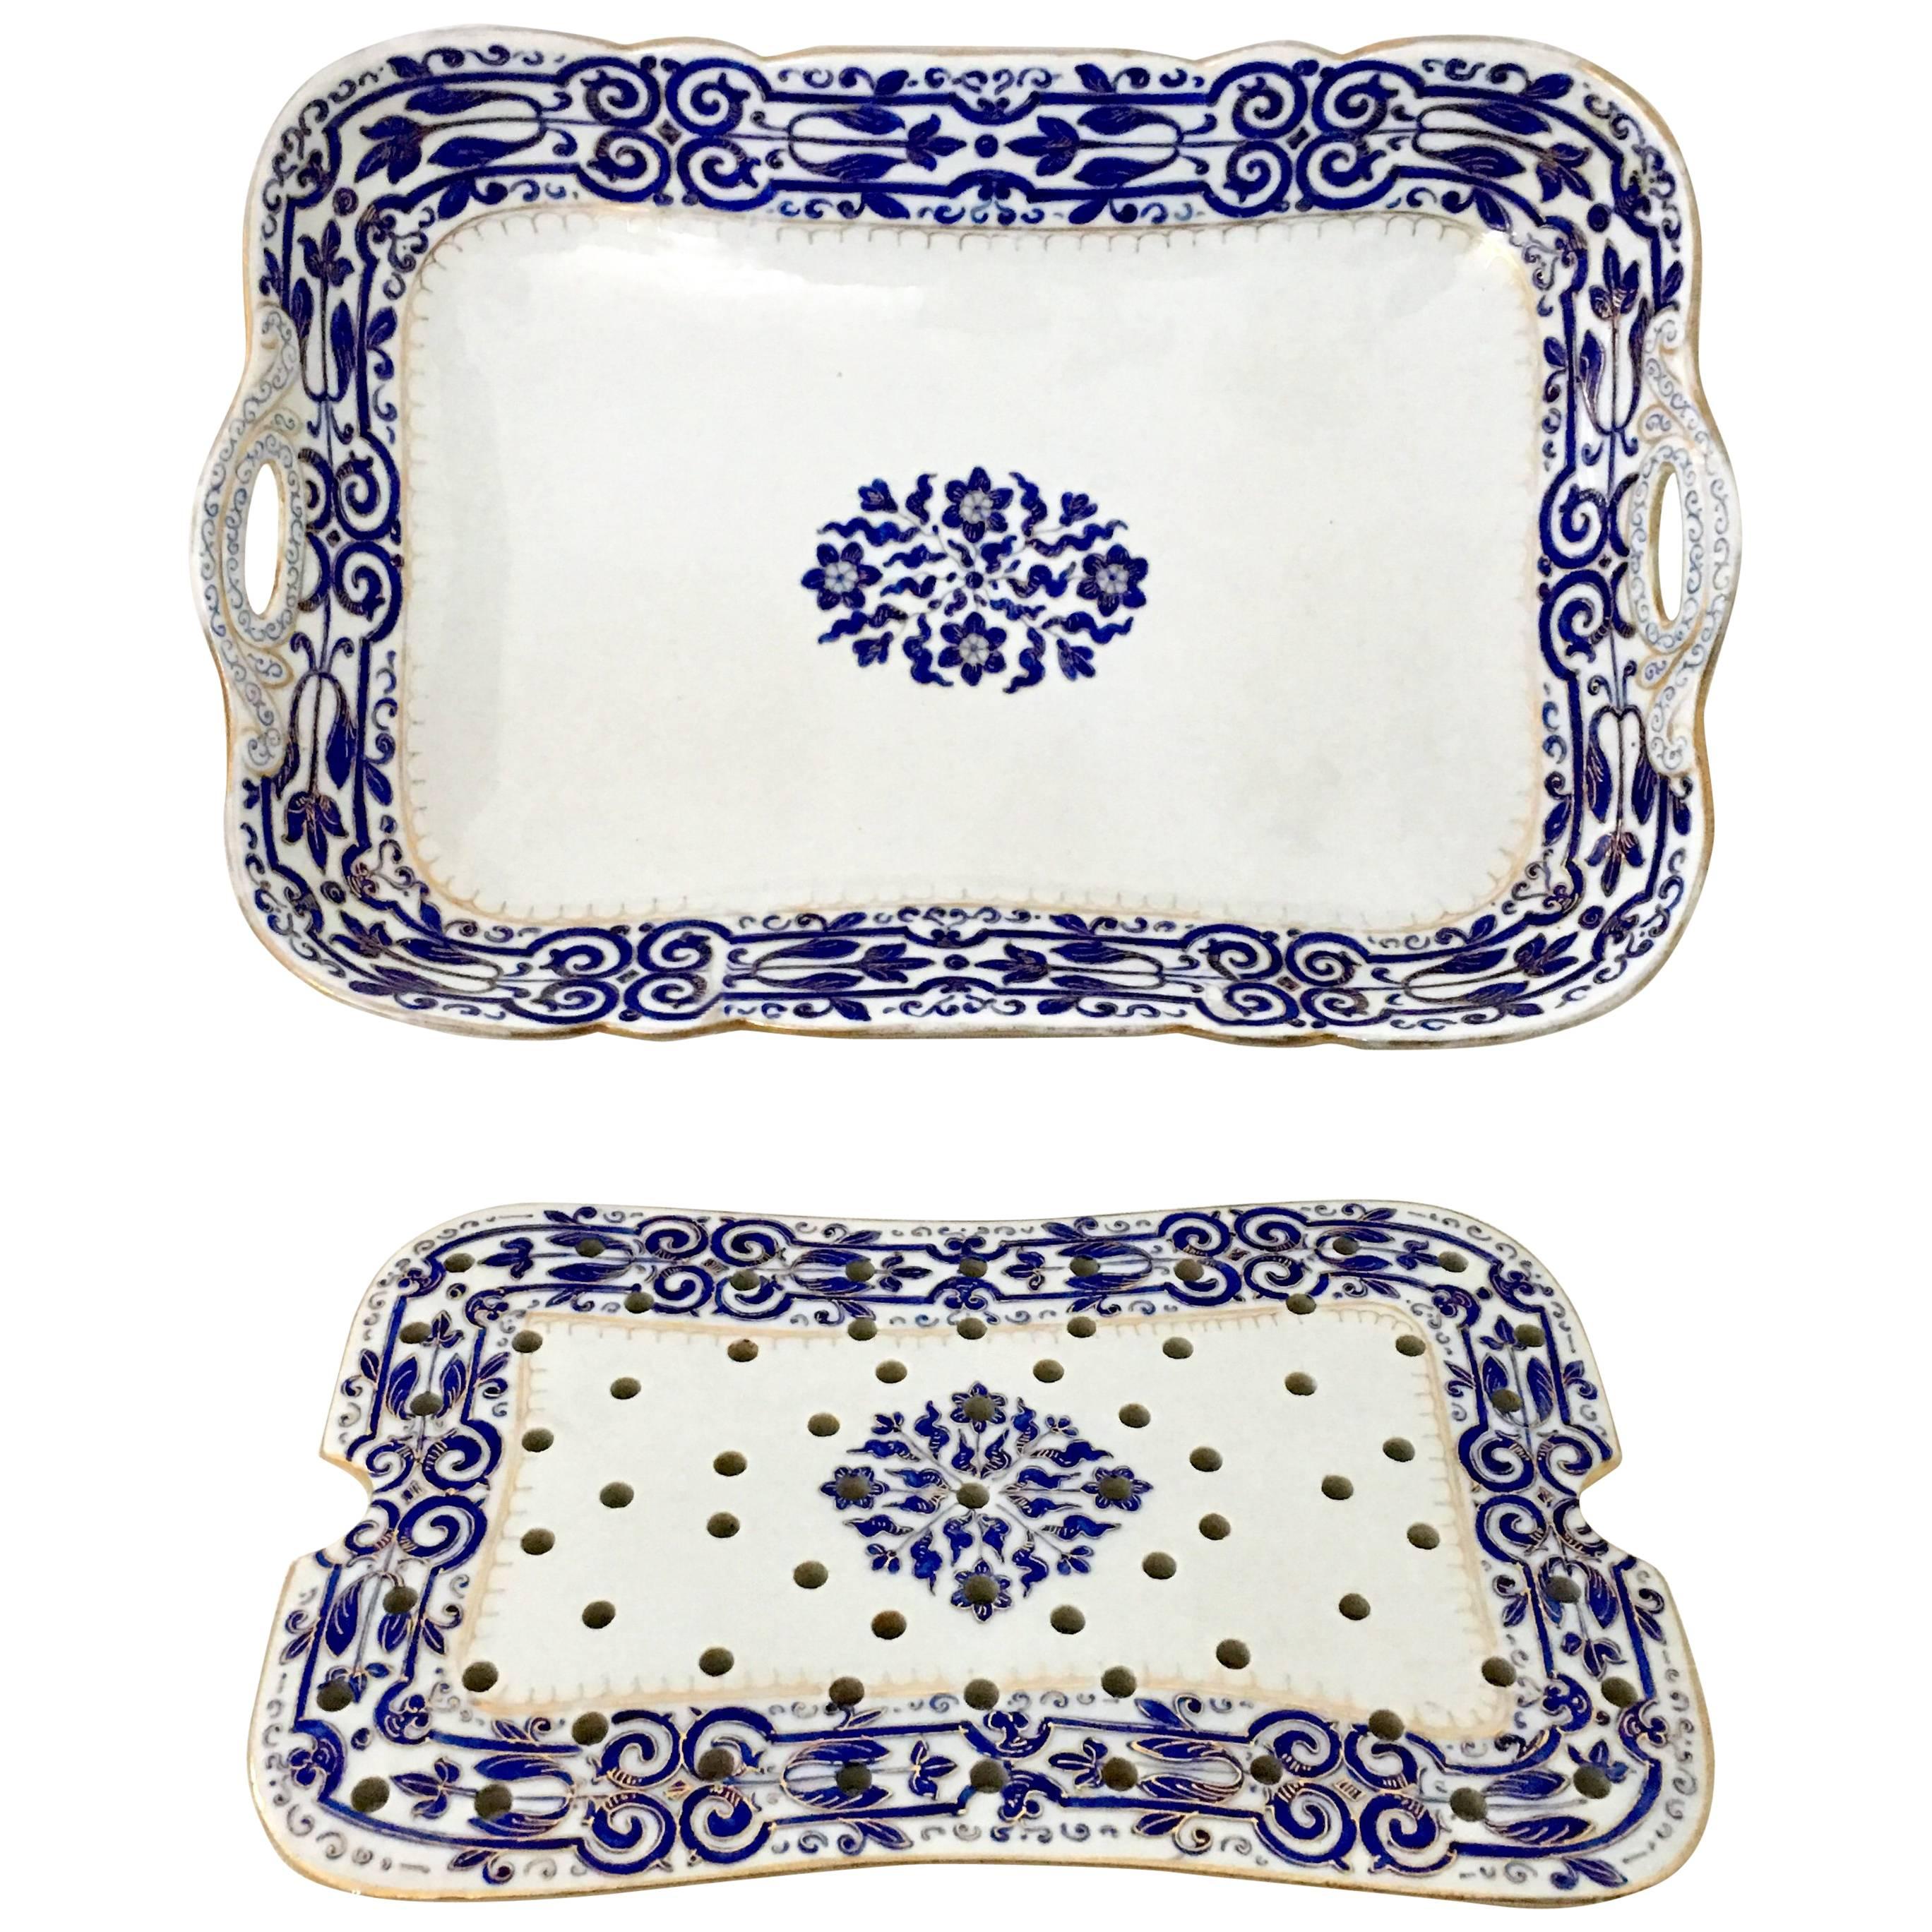 19th Century Hand-Painted Porcelain Serving Tray and Trivet by Fischer & Mieg